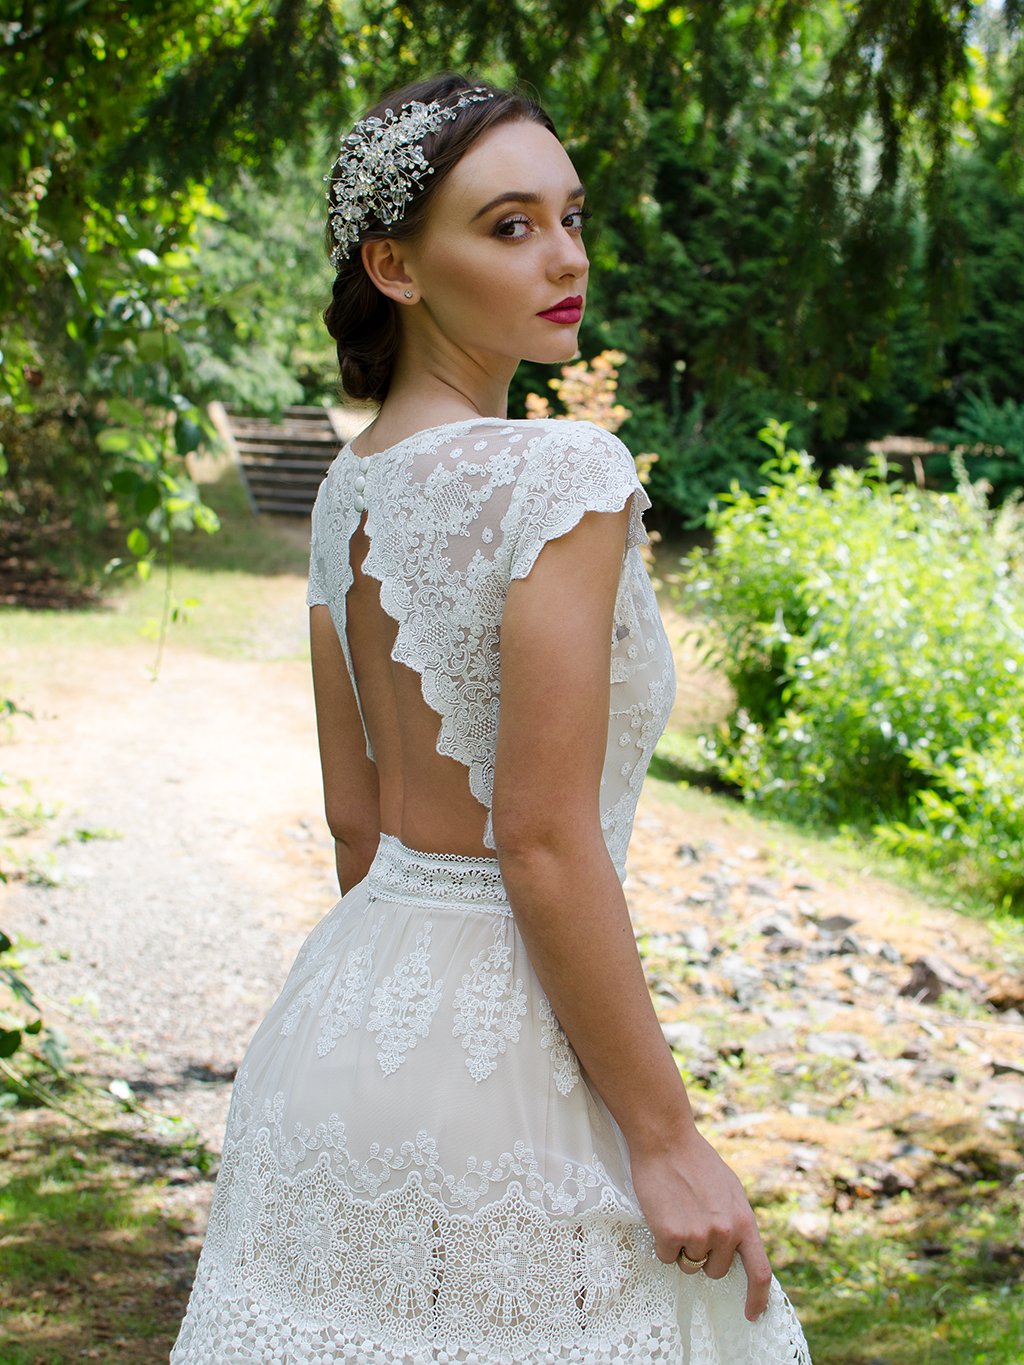 Boho Illusion Lace Boho Lace Wedding Dress With Floral Pattern And Sweep  Train From Greatvip, $142.47